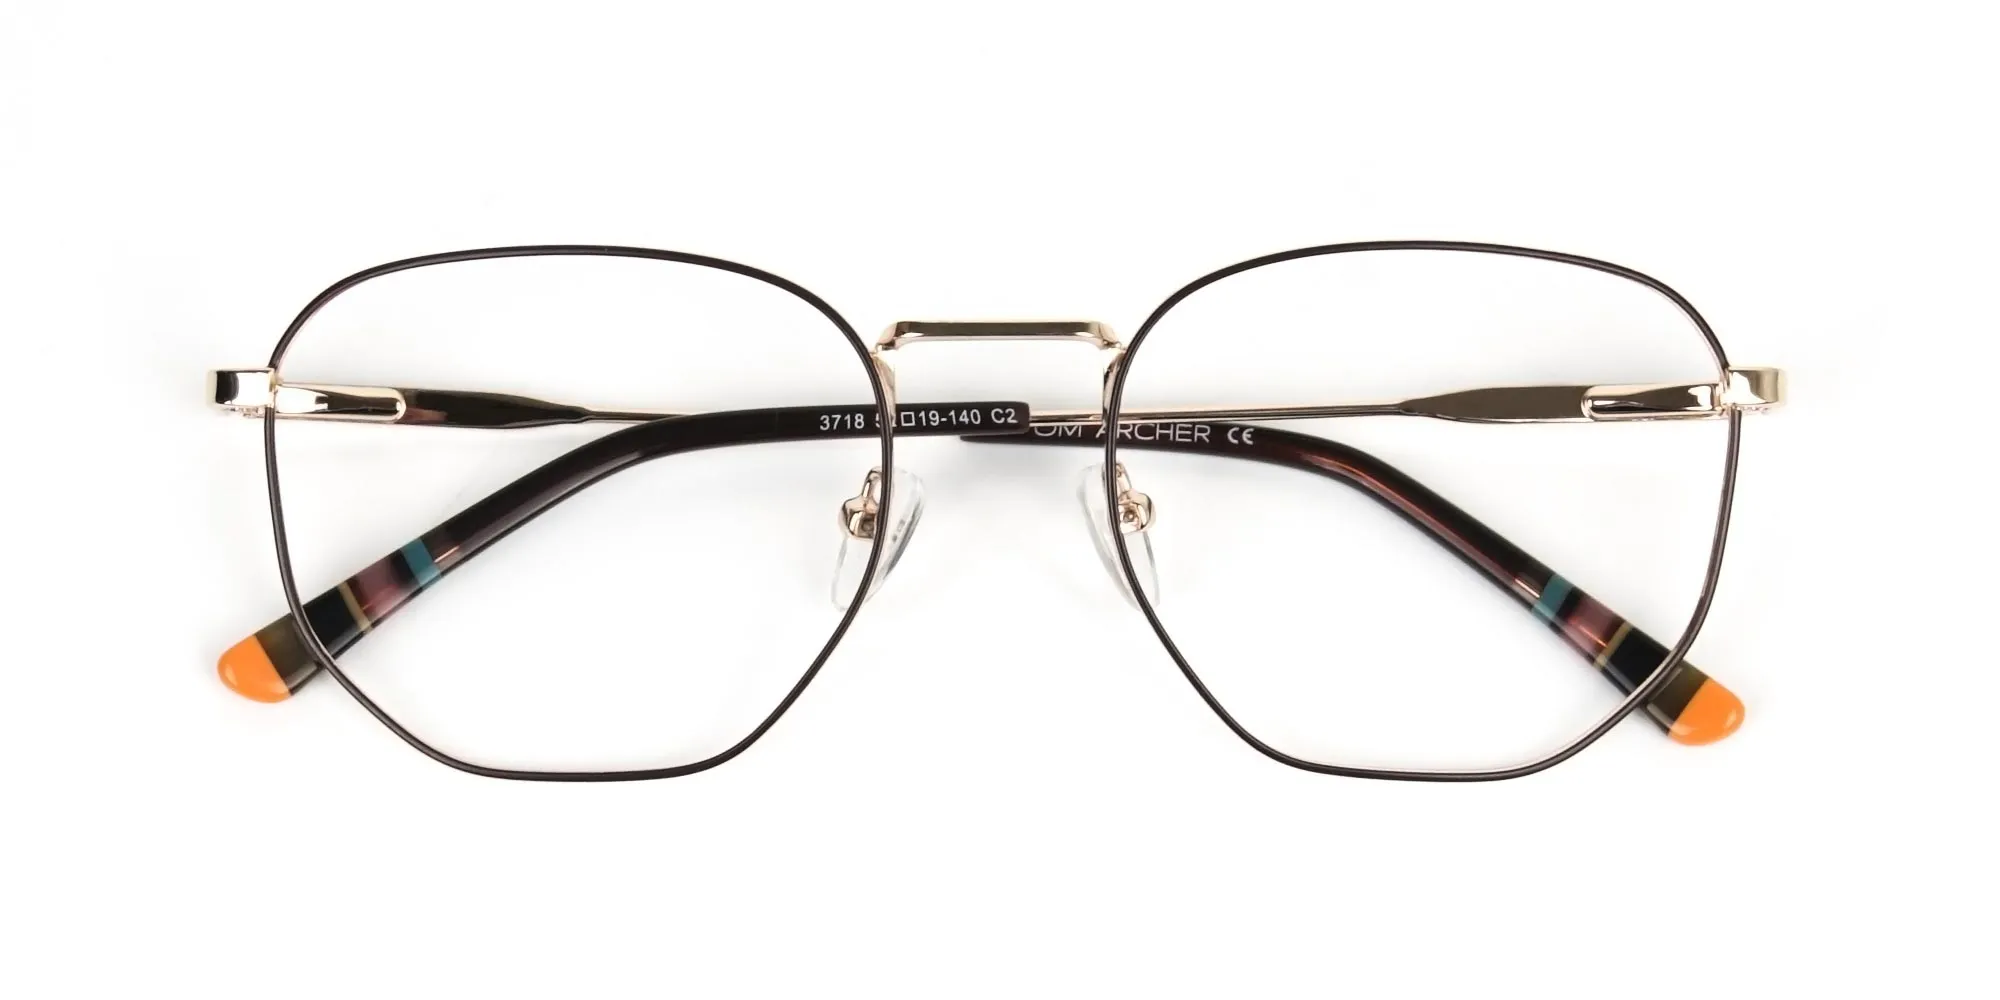 Geometric Brown & Gold Spectacles - 2